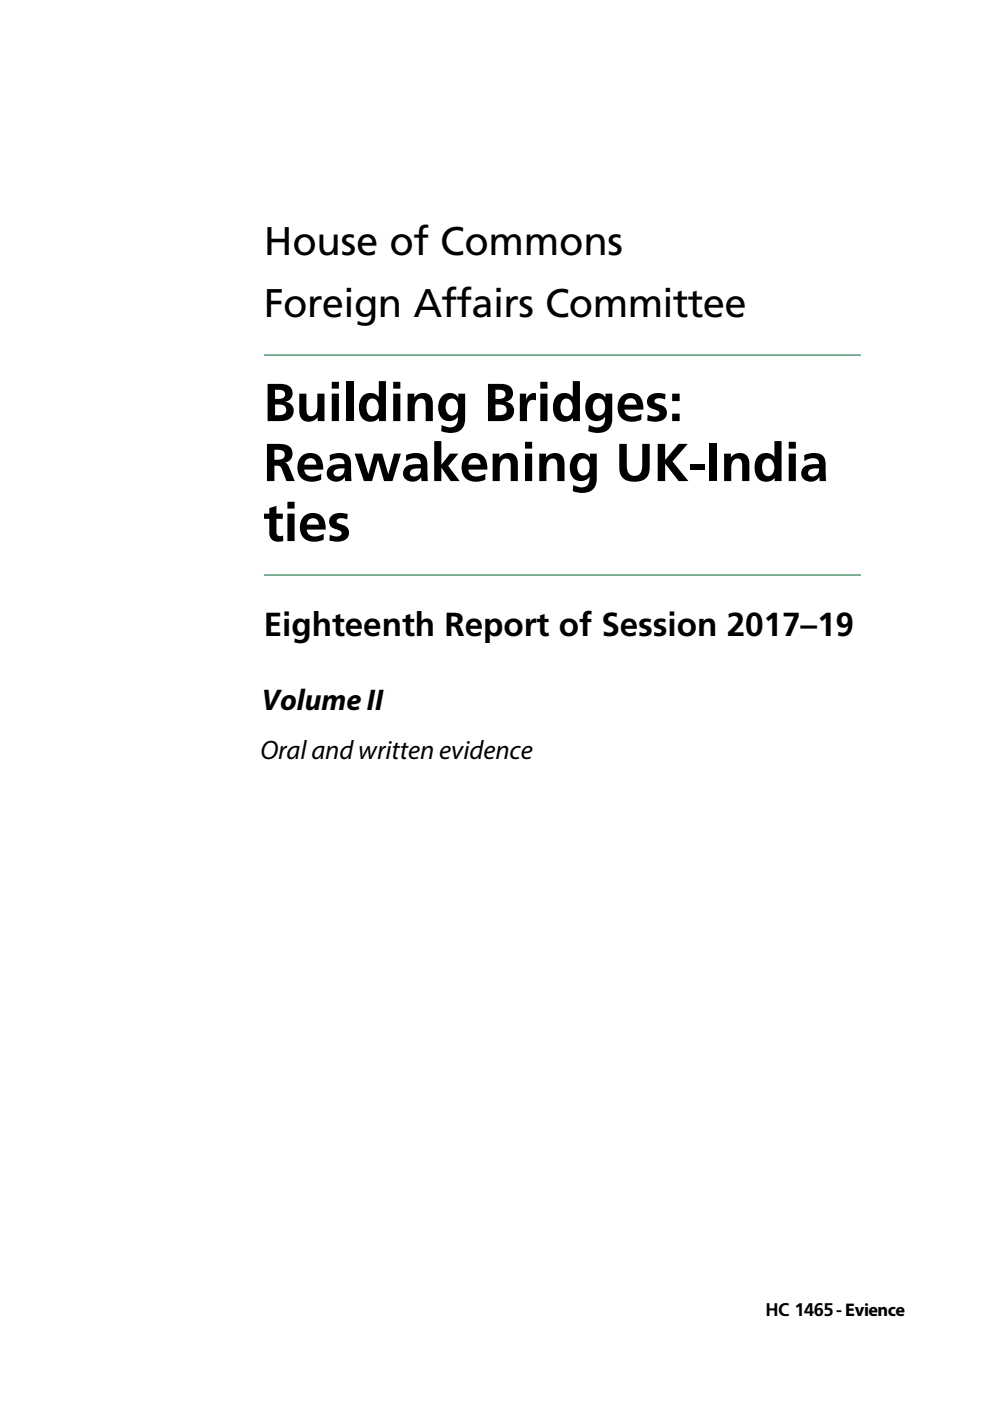 Foreign Affairs Committee 18th Report. Building Bridges: Reawakening UK-India ties Volume 2. Oral and written evidence